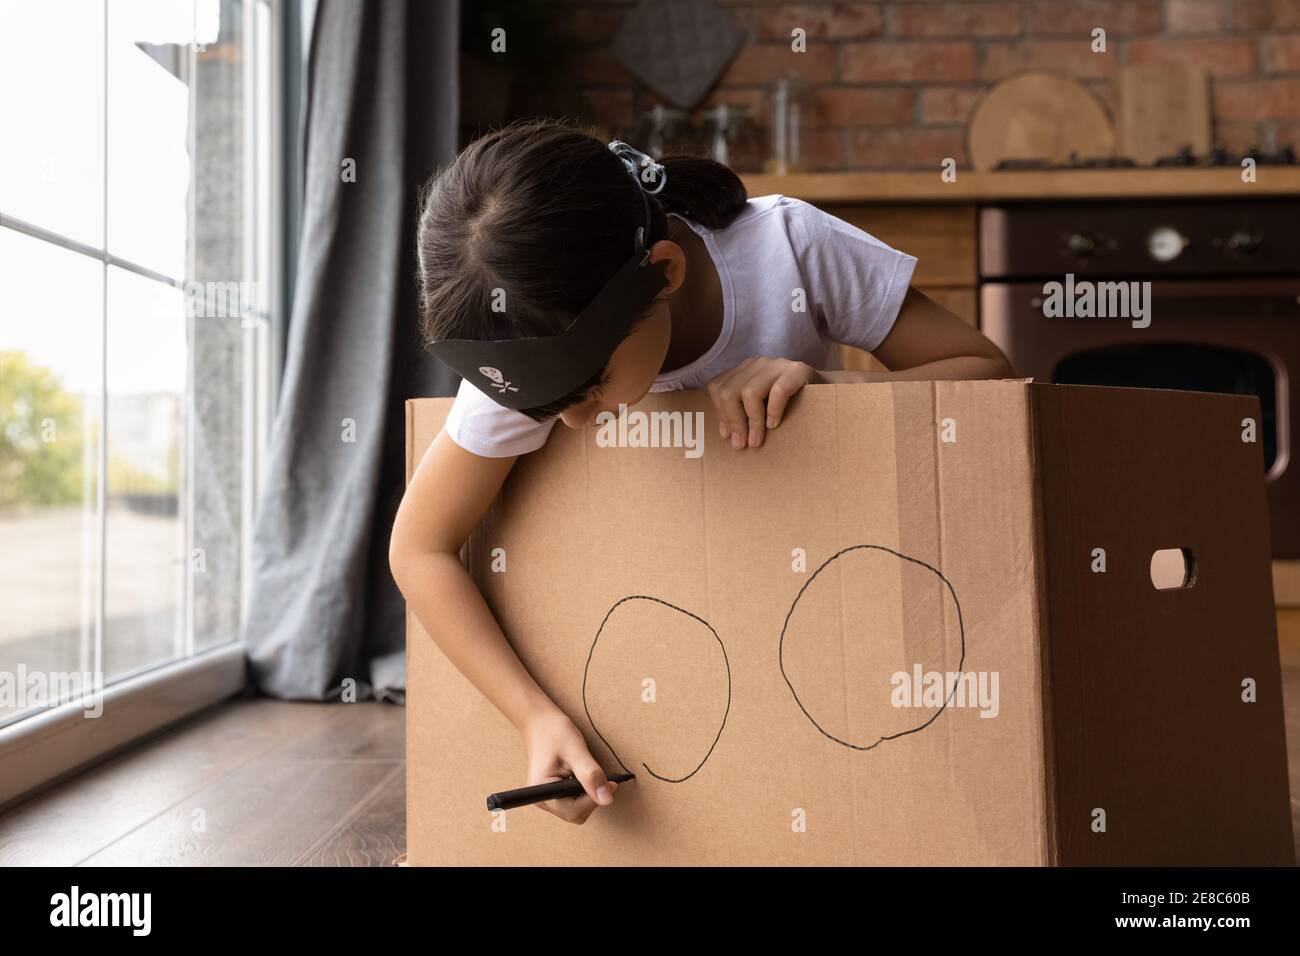 Close up little girl playing pirate, drawing on cardboard box Stock Photo